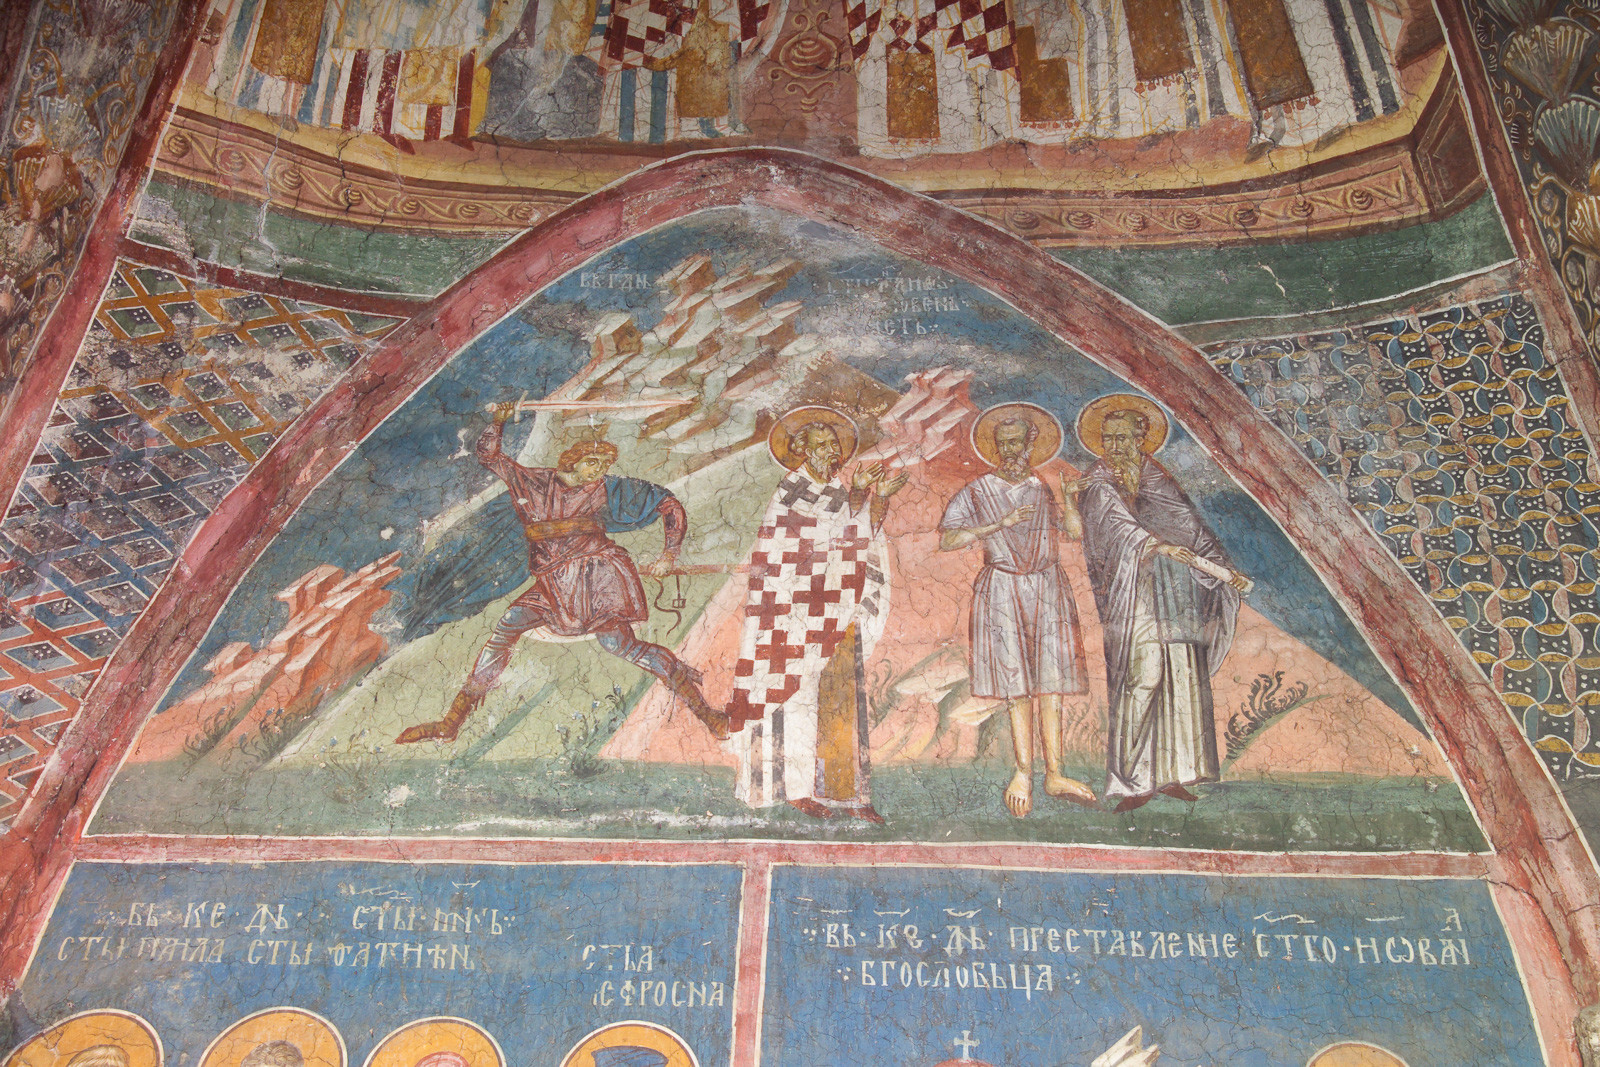 7II-1 September 3 - The martyr-priest Anthimus (scene), Sts. Theoctistus and Euthimius the Great (figures)